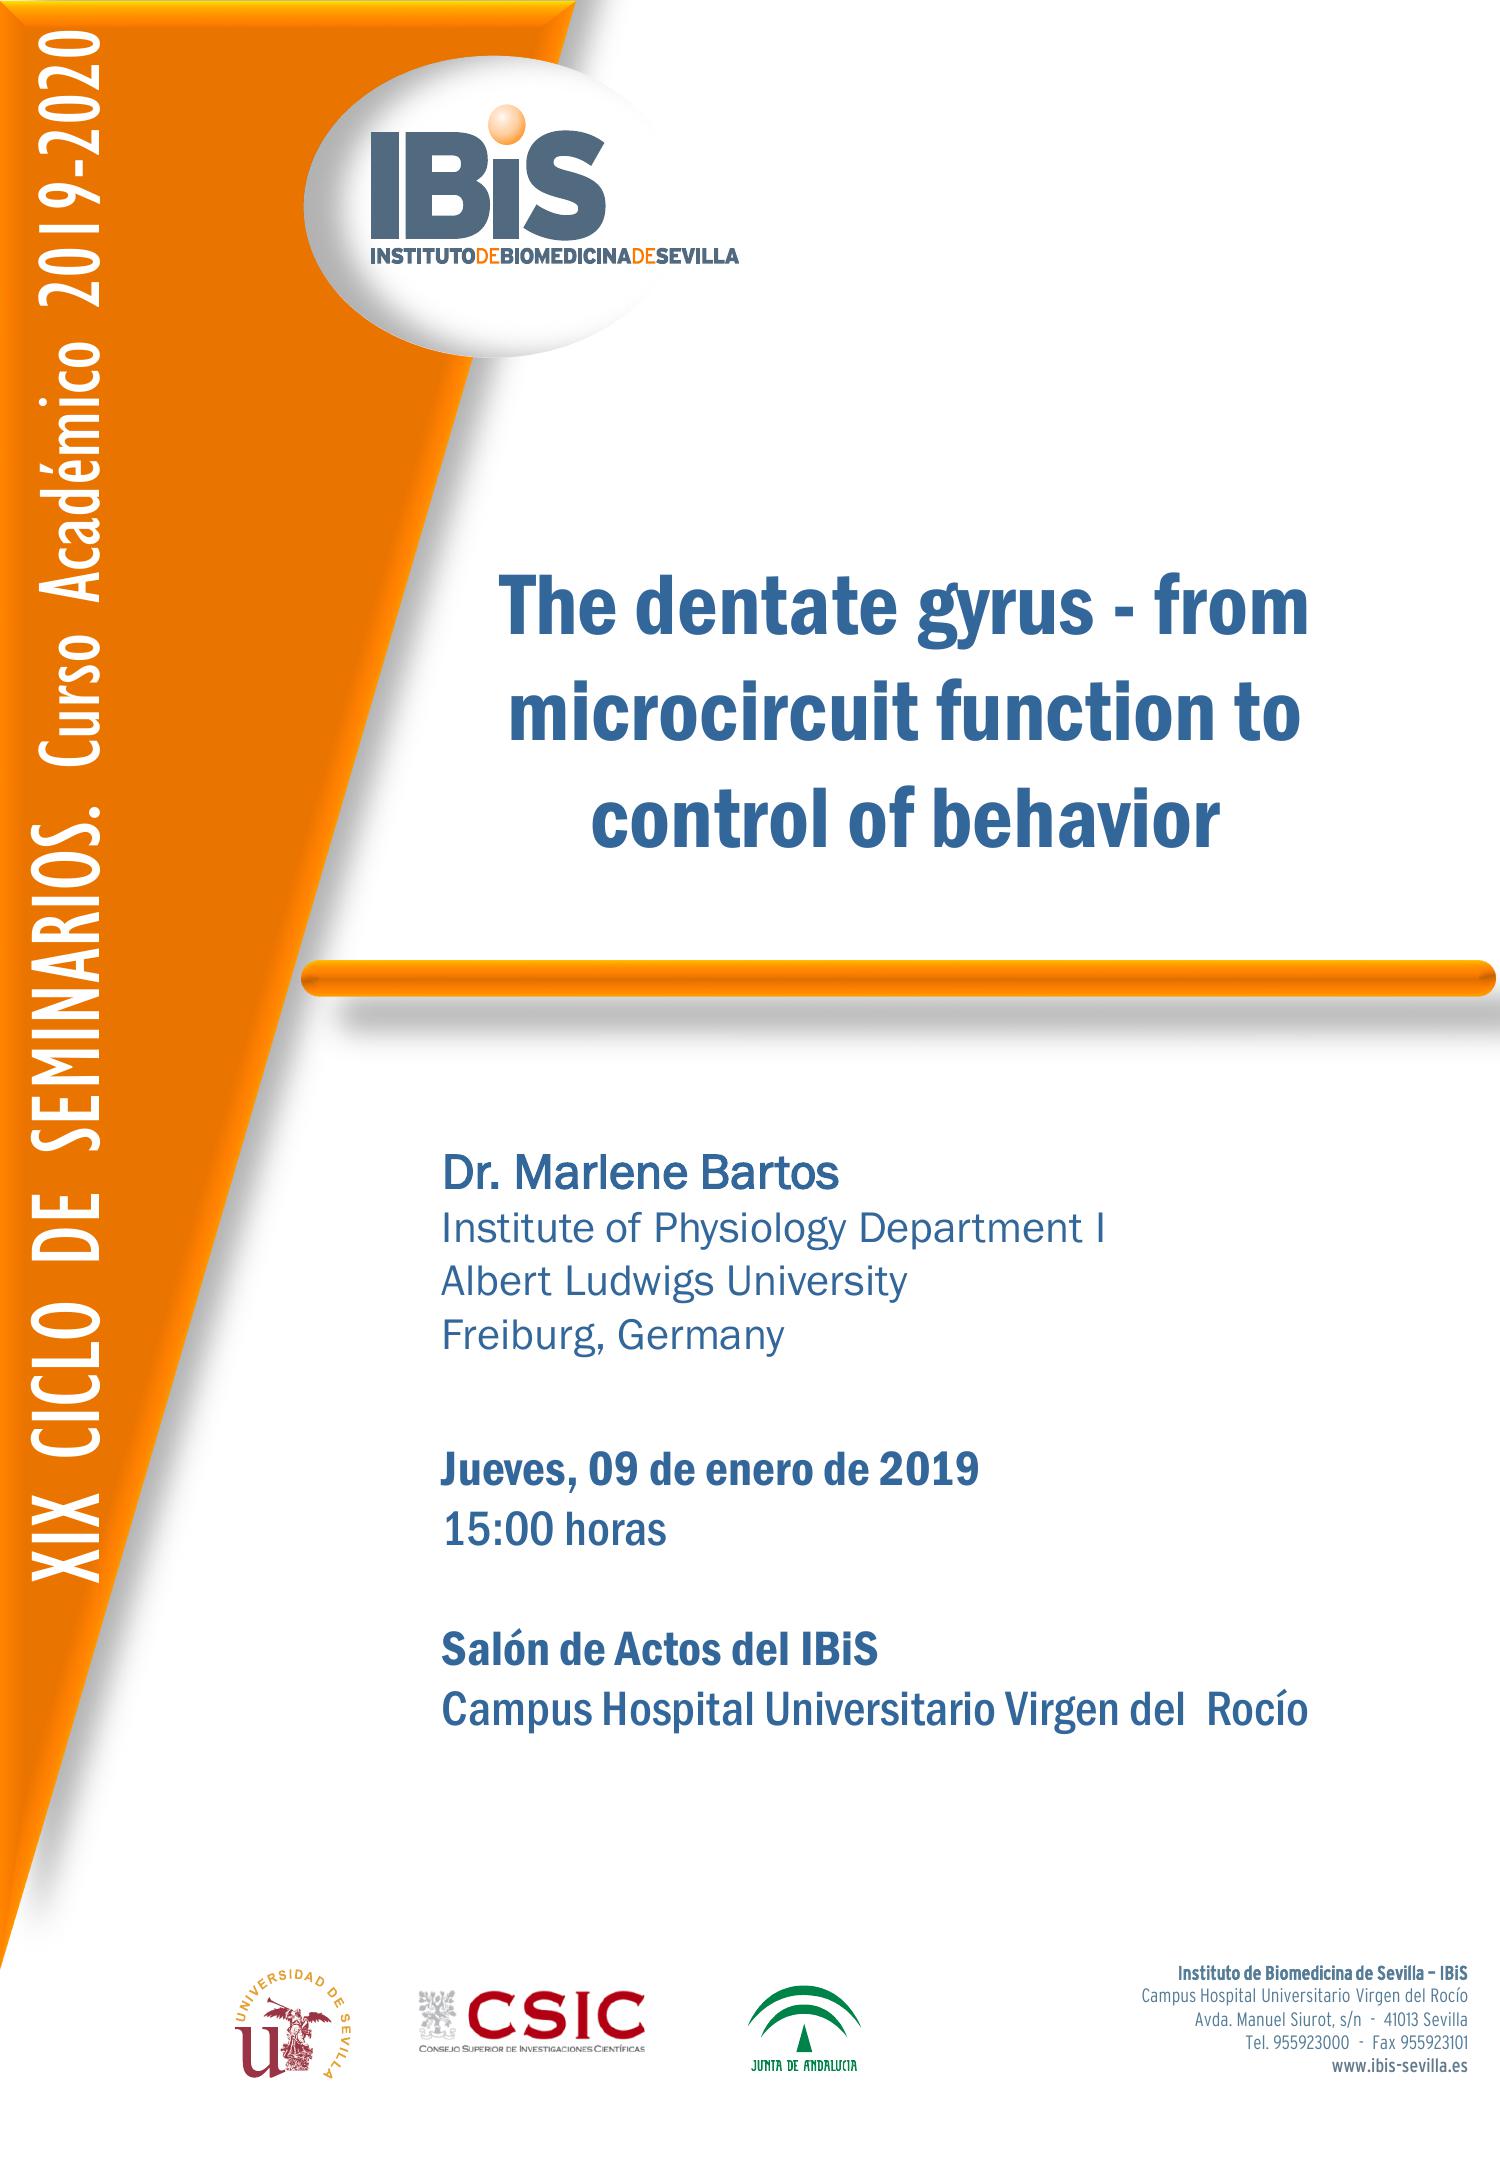 Poster: The dentate gyrus - from microcircuit function to control of behavior